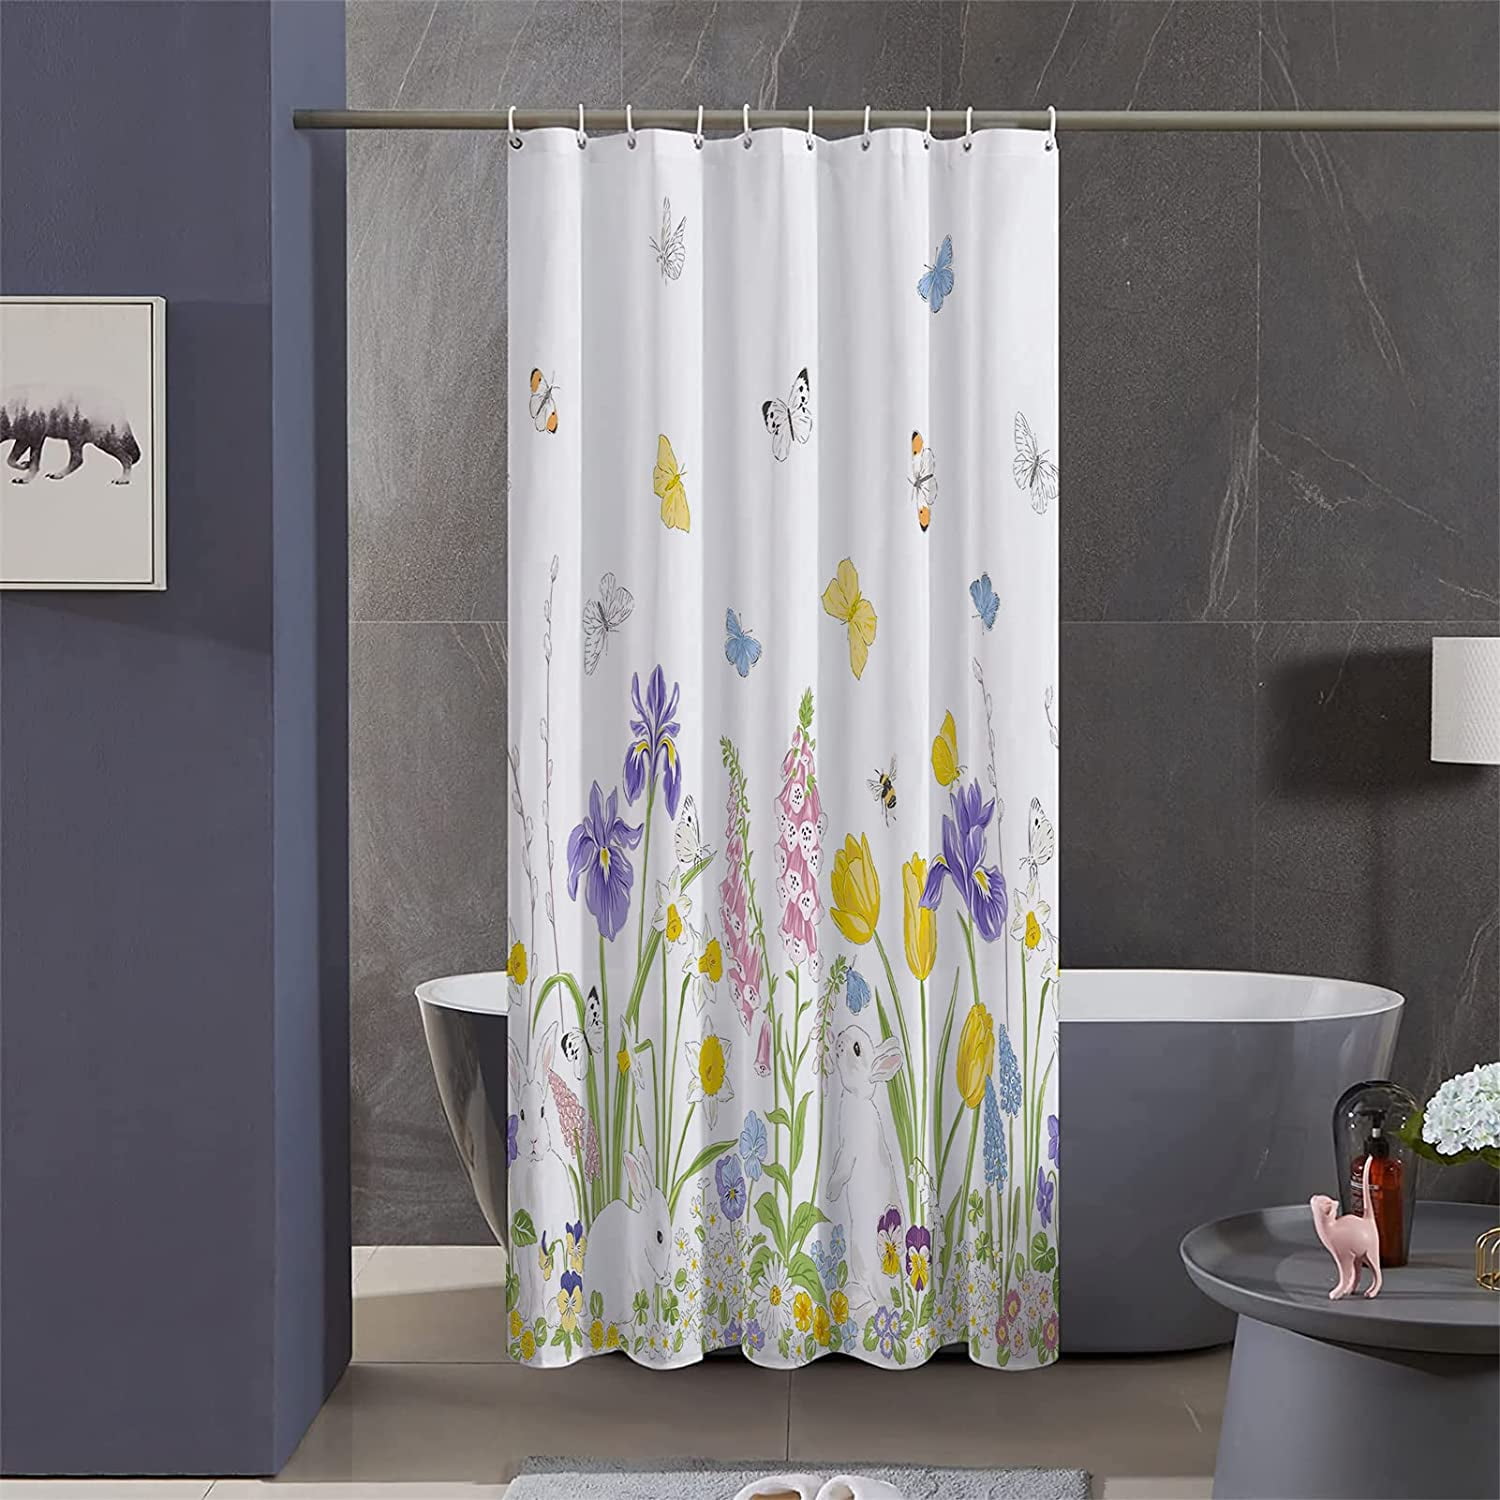 Stall Shower Curtain,36x72 inch RV Bathroom Shower Curtains Set with ...